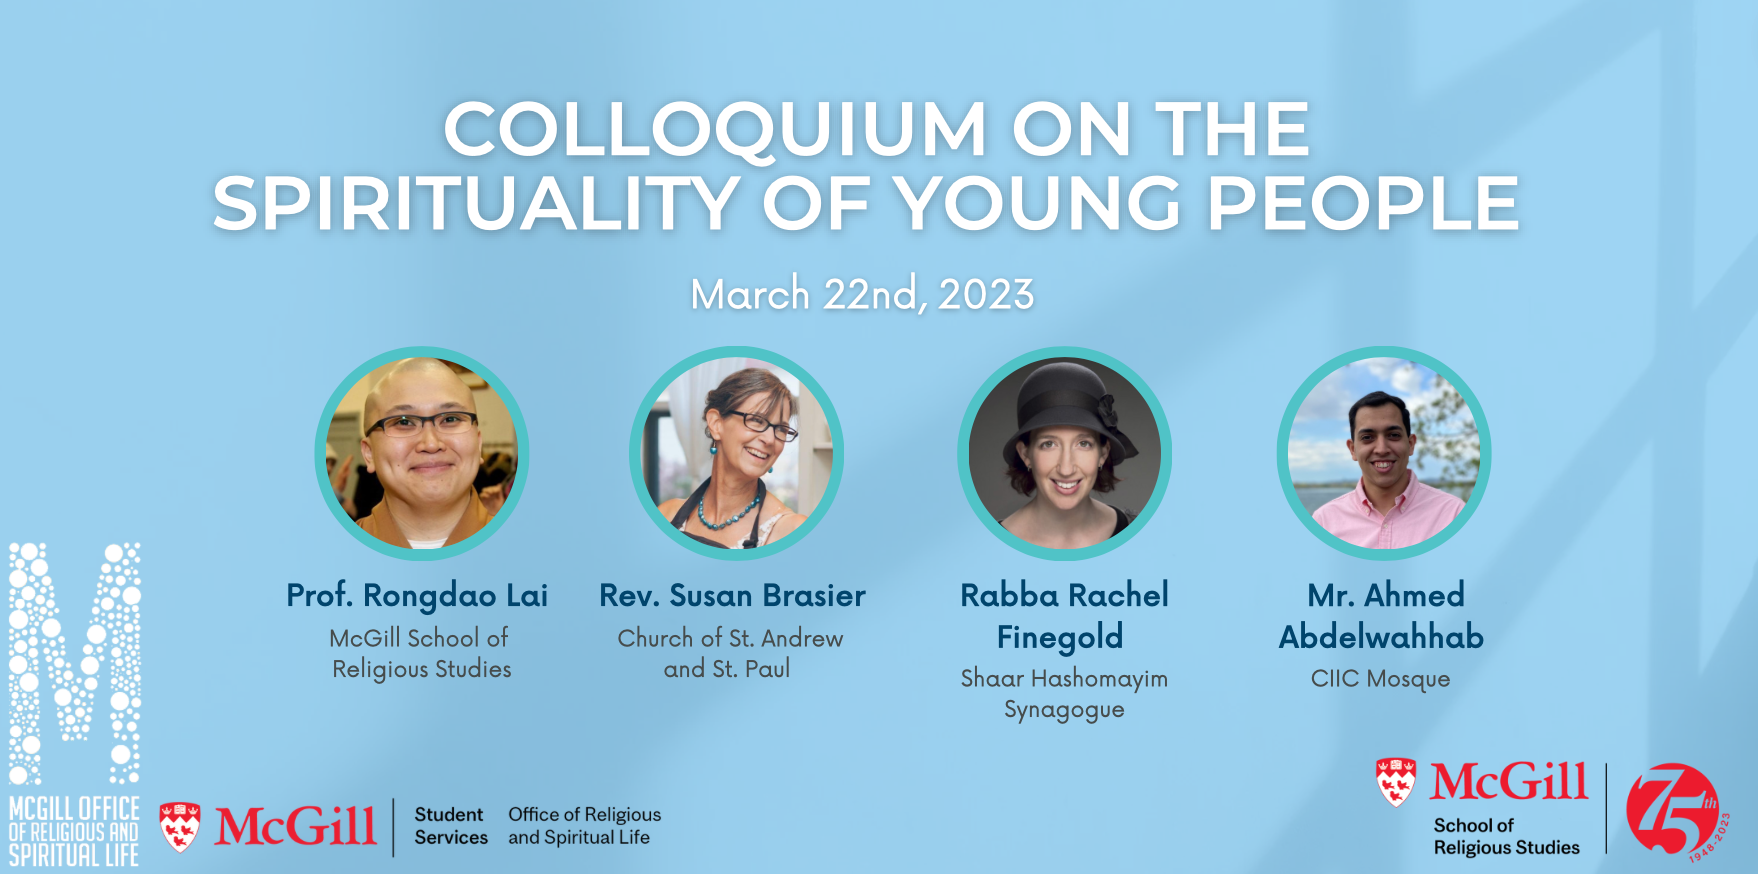 Colloquium on the spirituality of young people, hosted by MORSL and McGill's School of Religious Studies